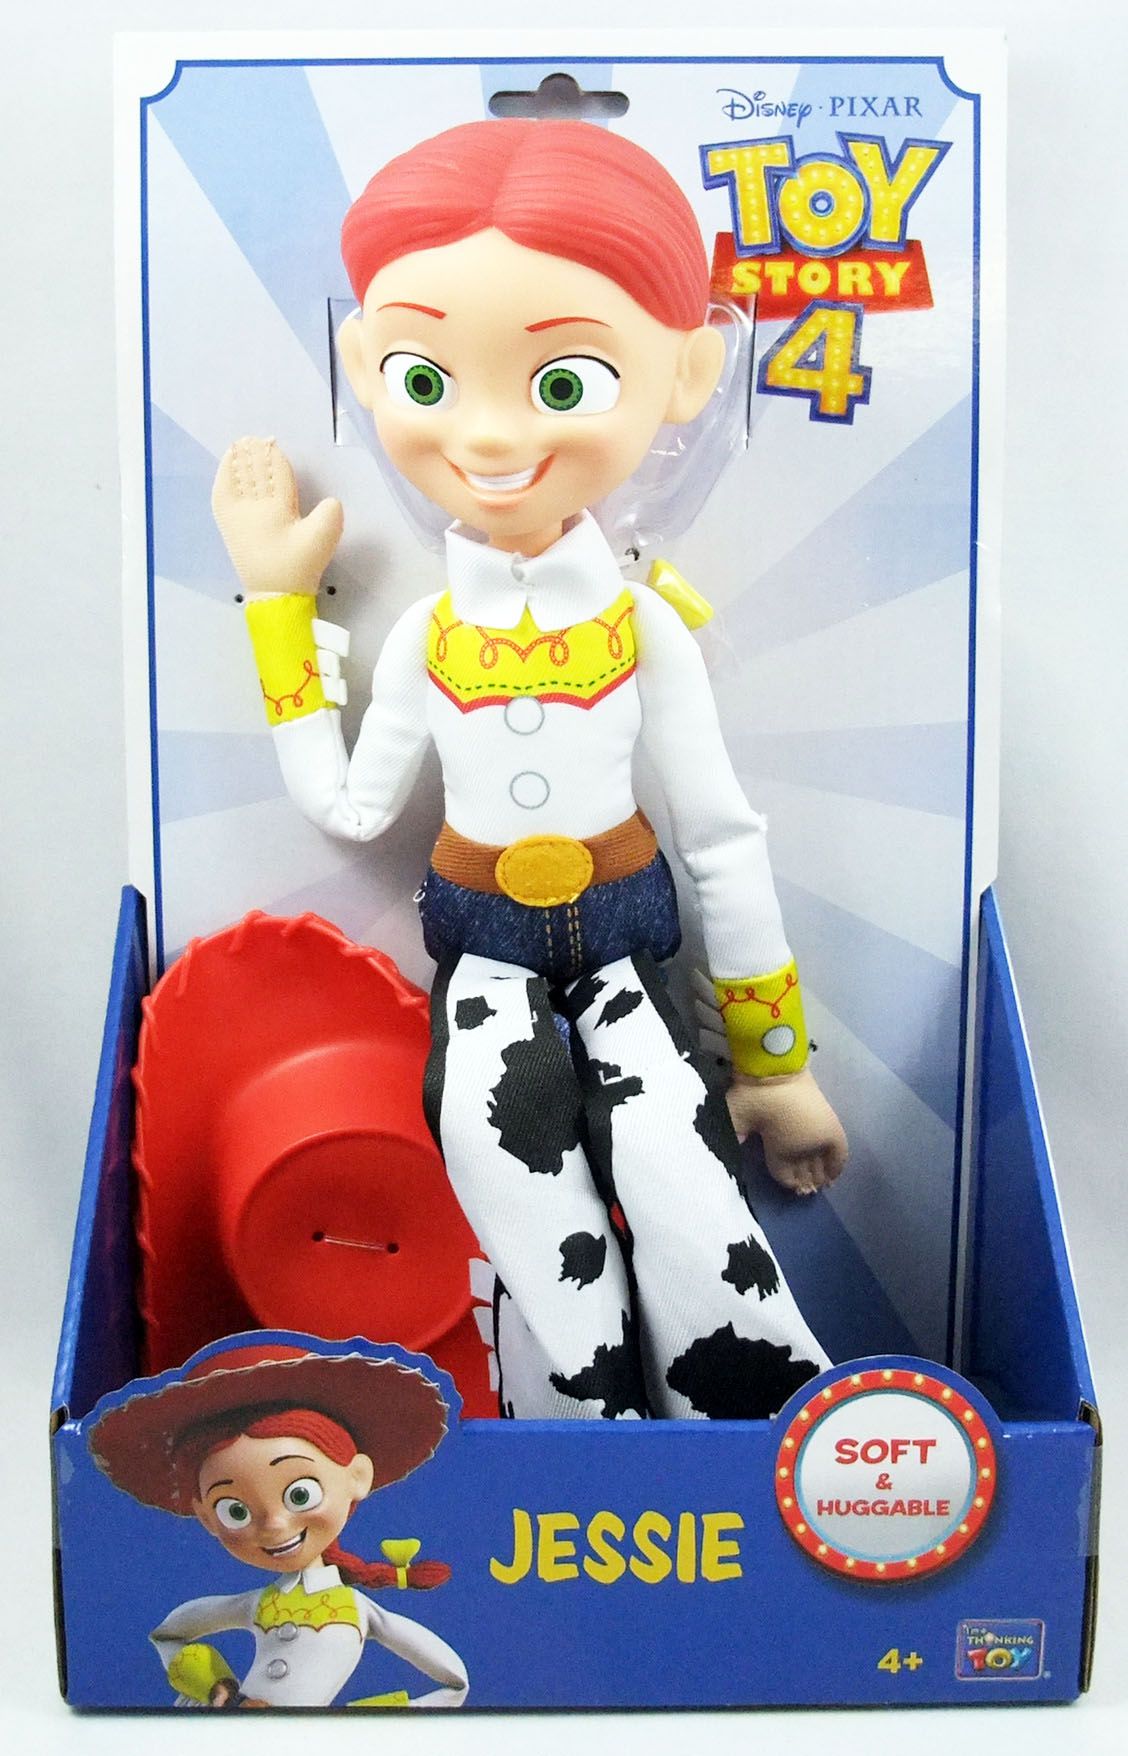 64512 Lansay Toy Story 4 Figurine Multicolore